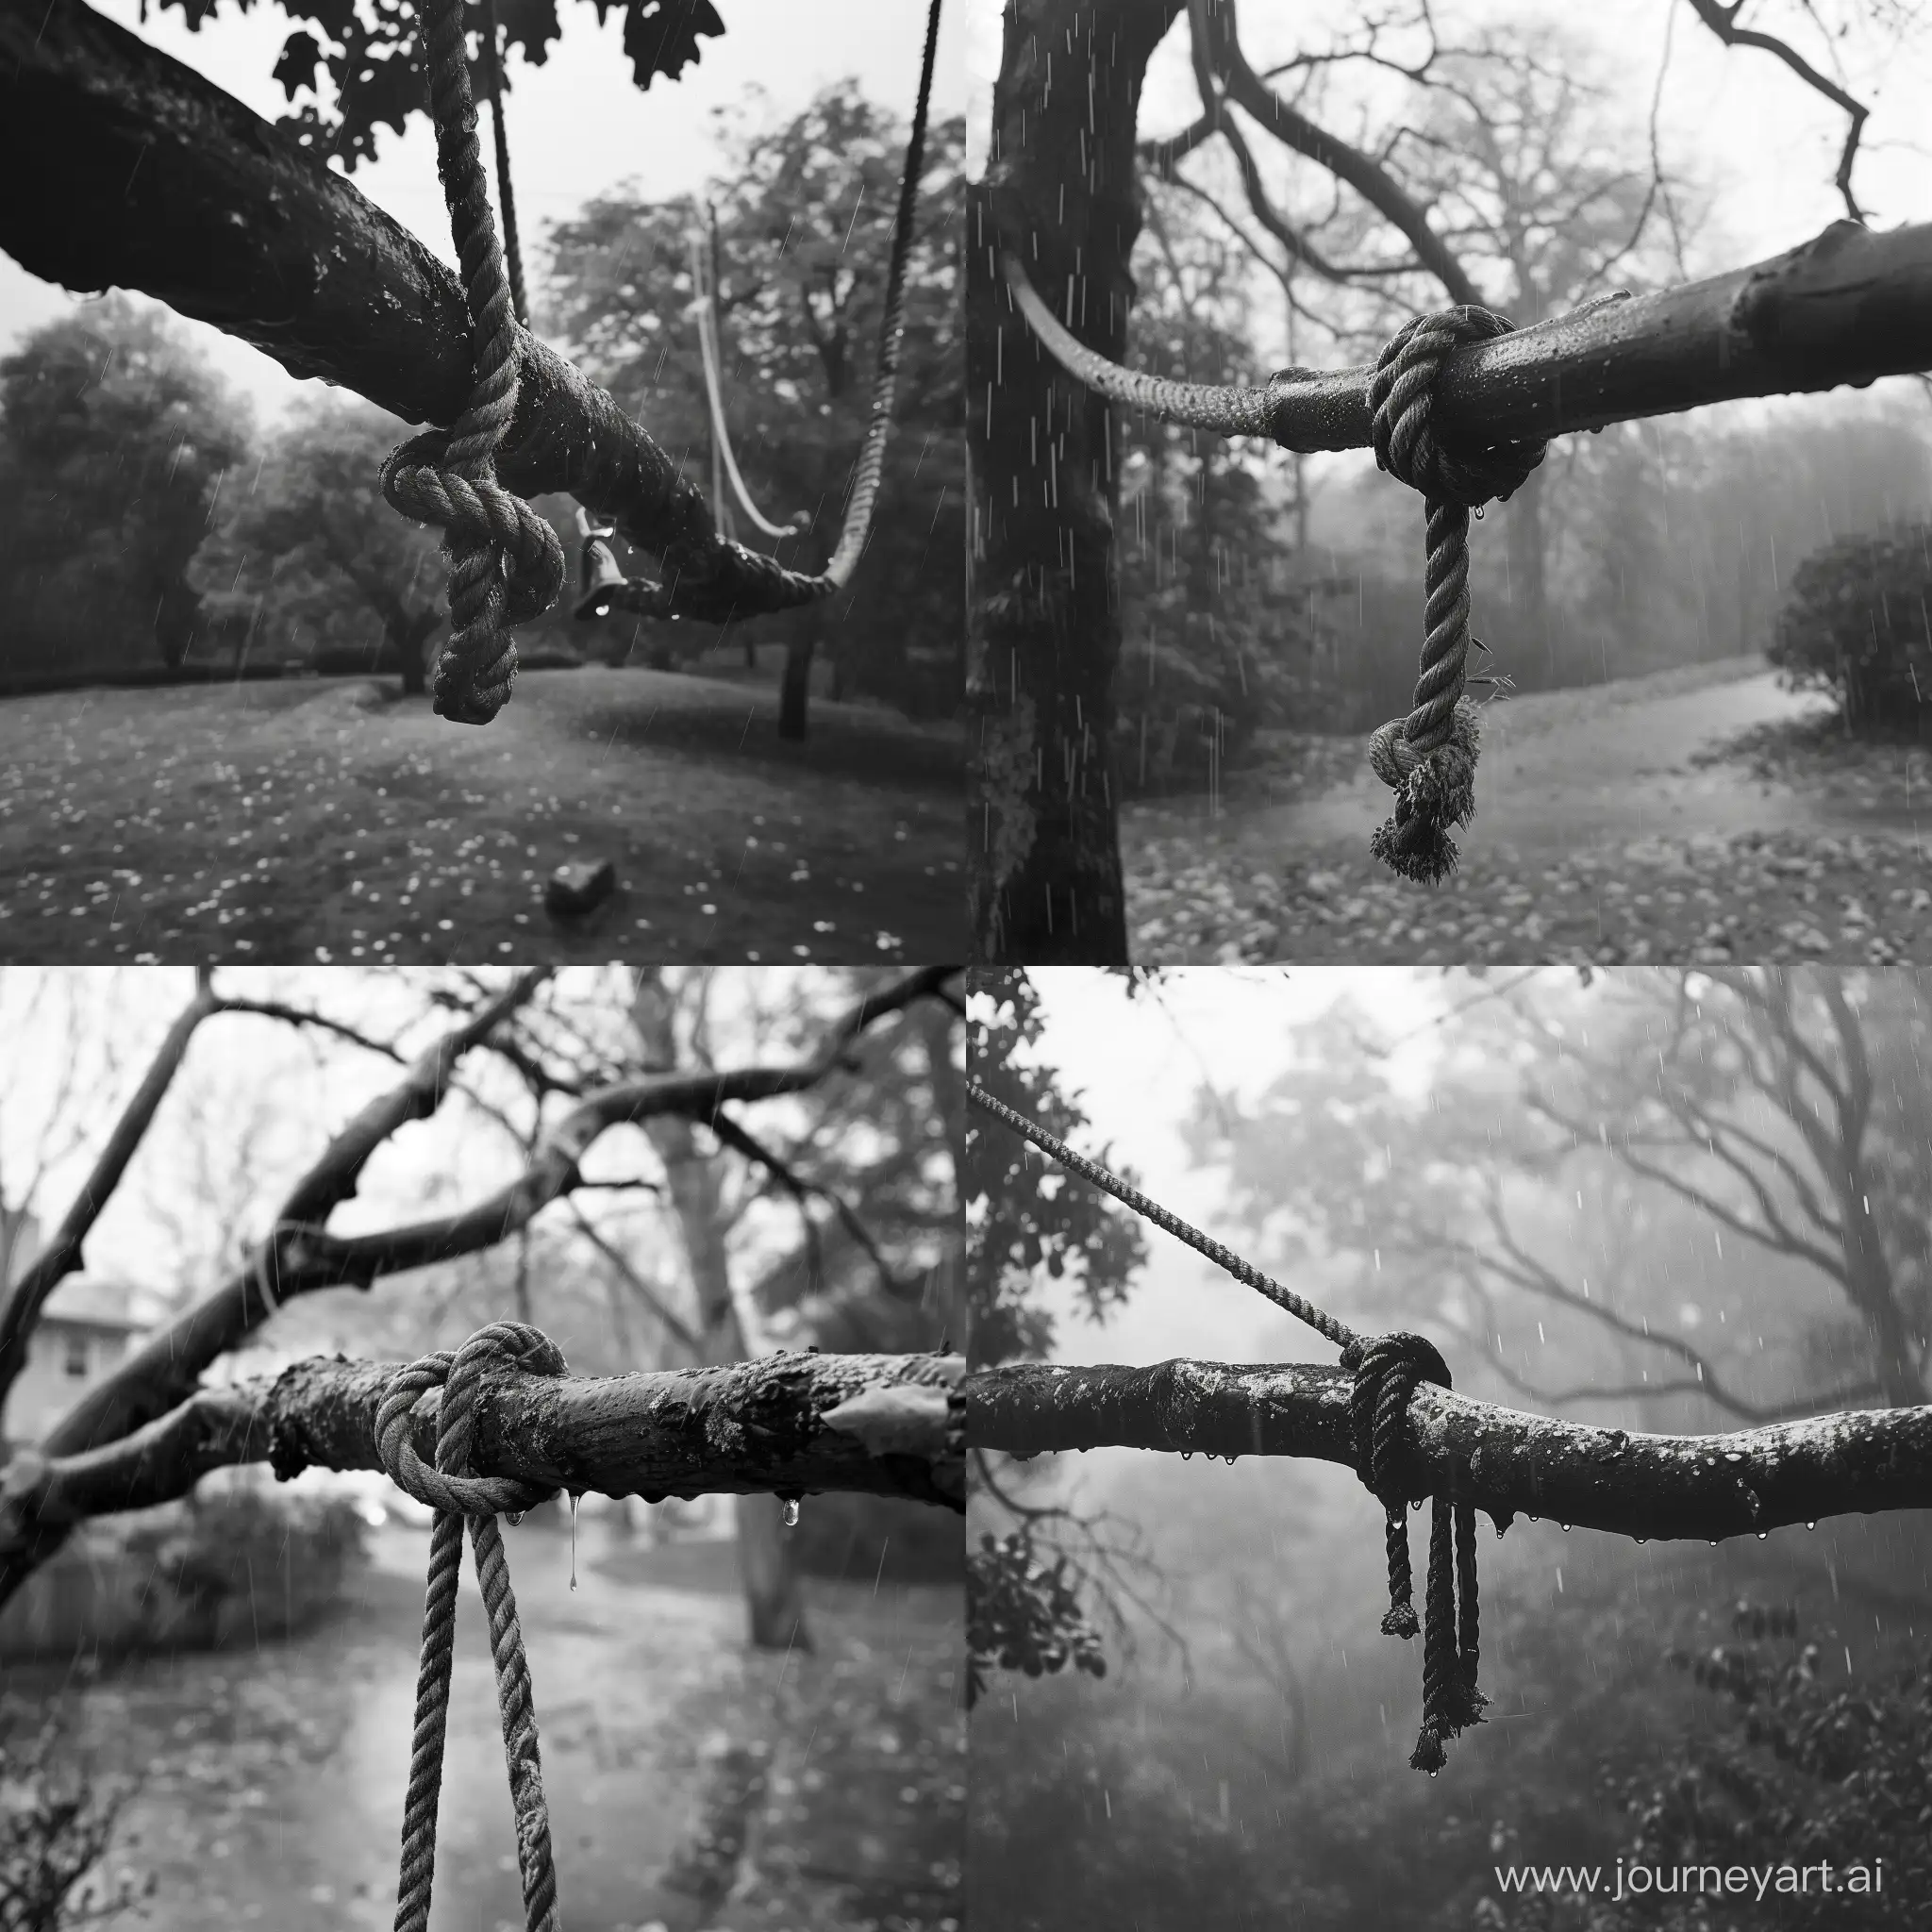 generate Autumn, depressing, faded colours, rope tied to a tree branch, rain, realistic style, white noise, black and white photo, wide angle lens, 17-40mm.